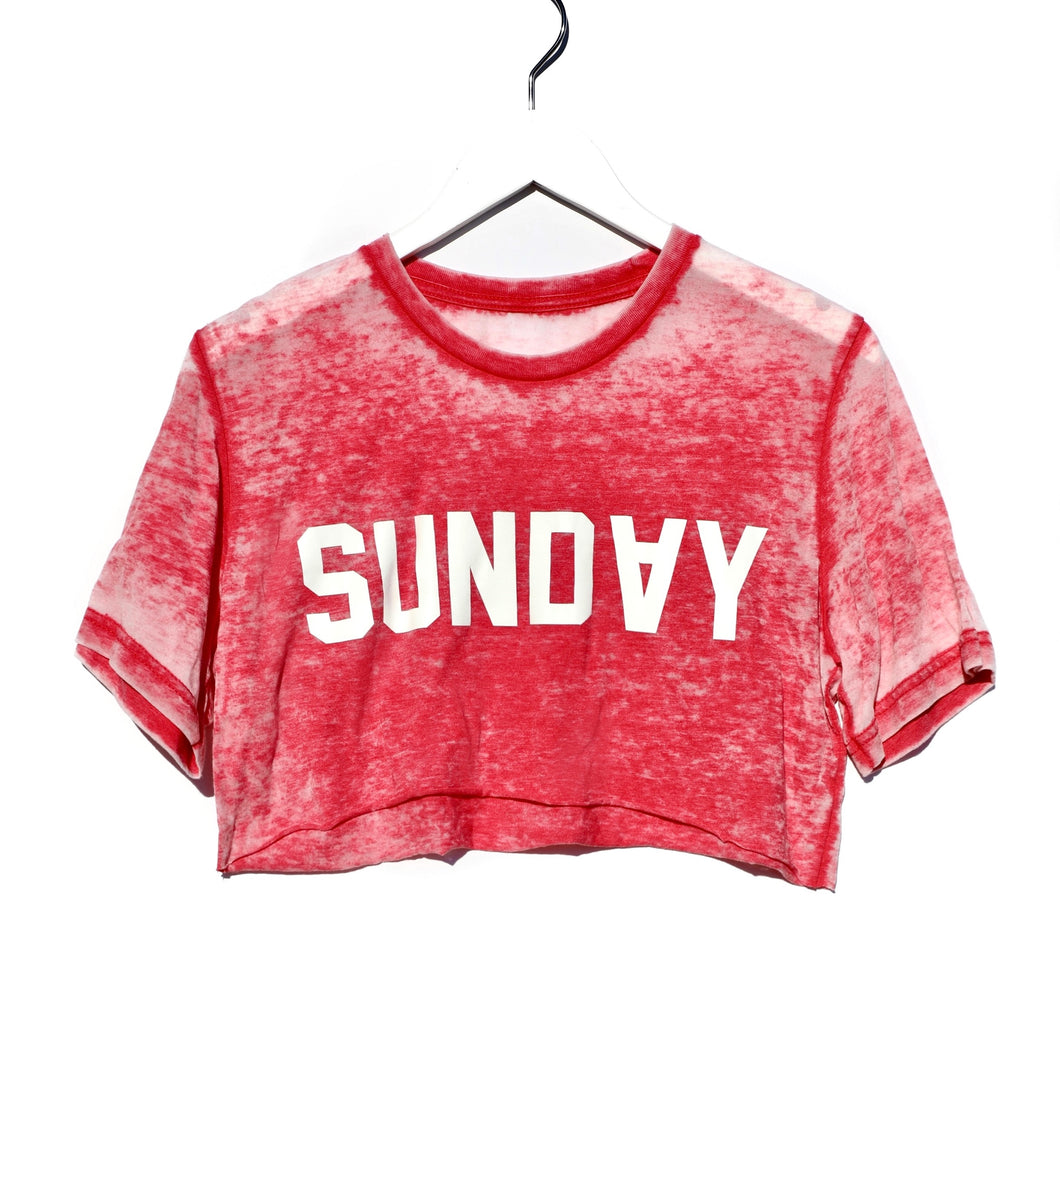 Cropped T-Shirt / SUNDAY Vintage Red